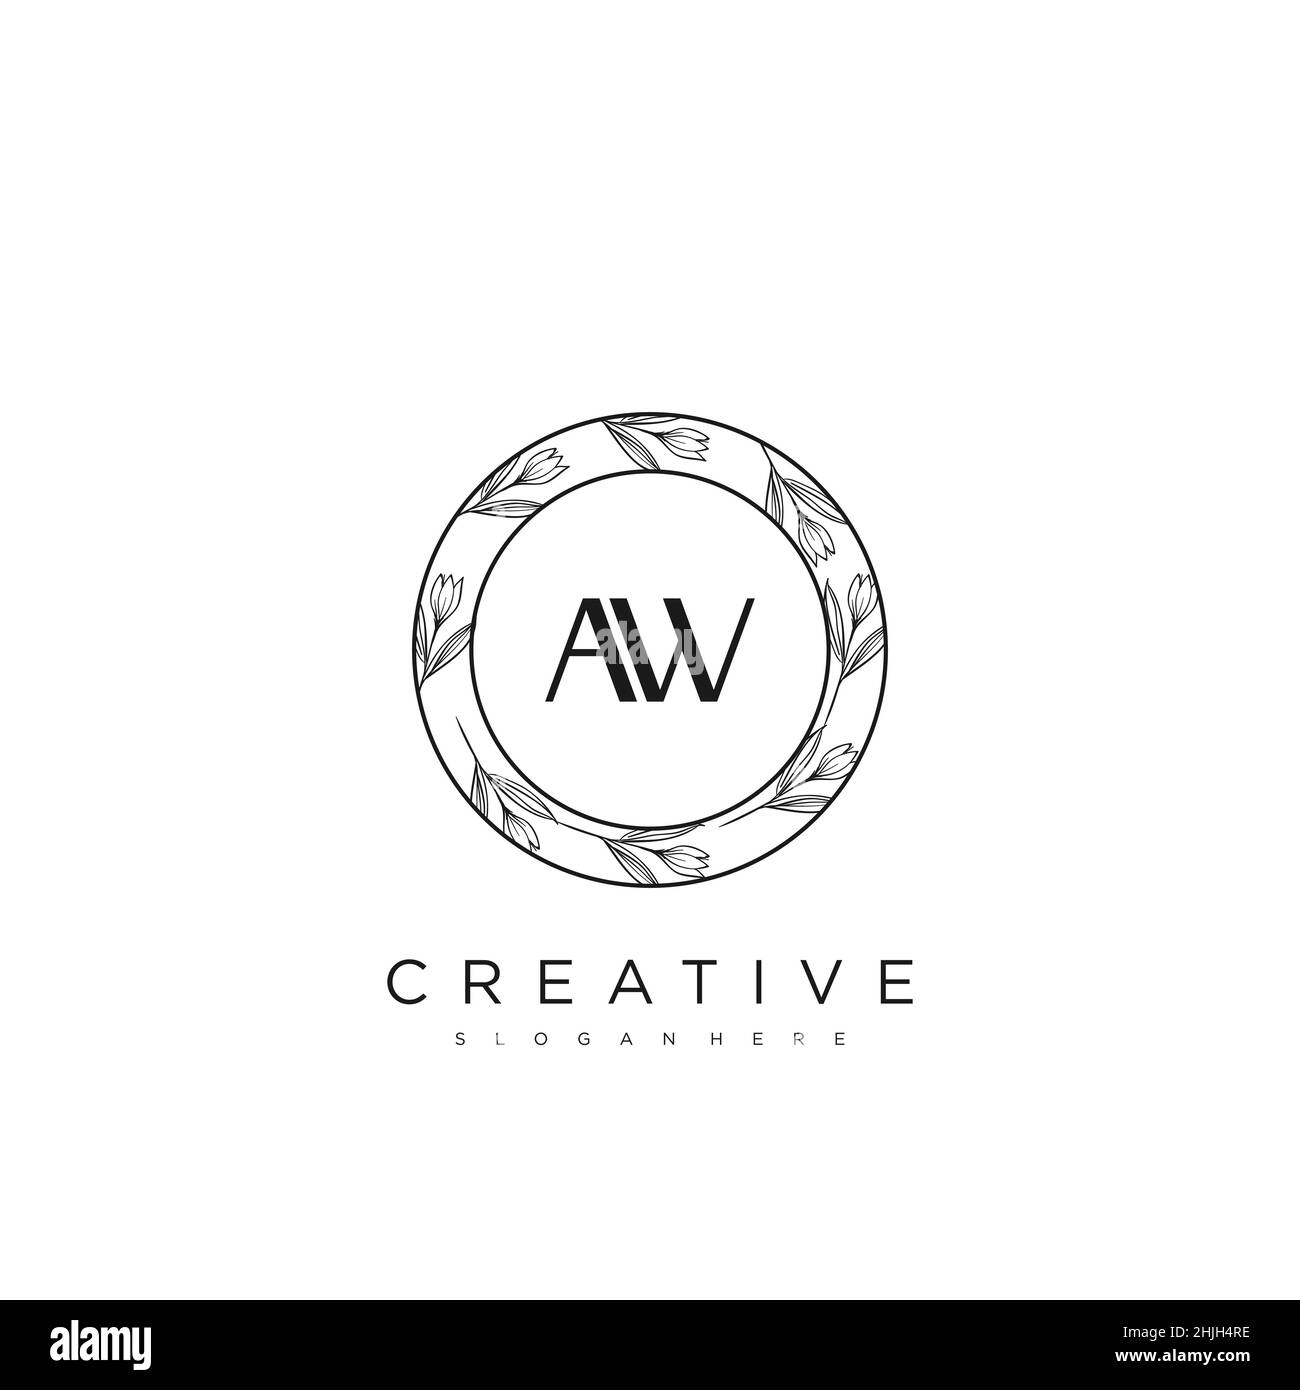 Aw logo with circle rounded negative space design Vector Image